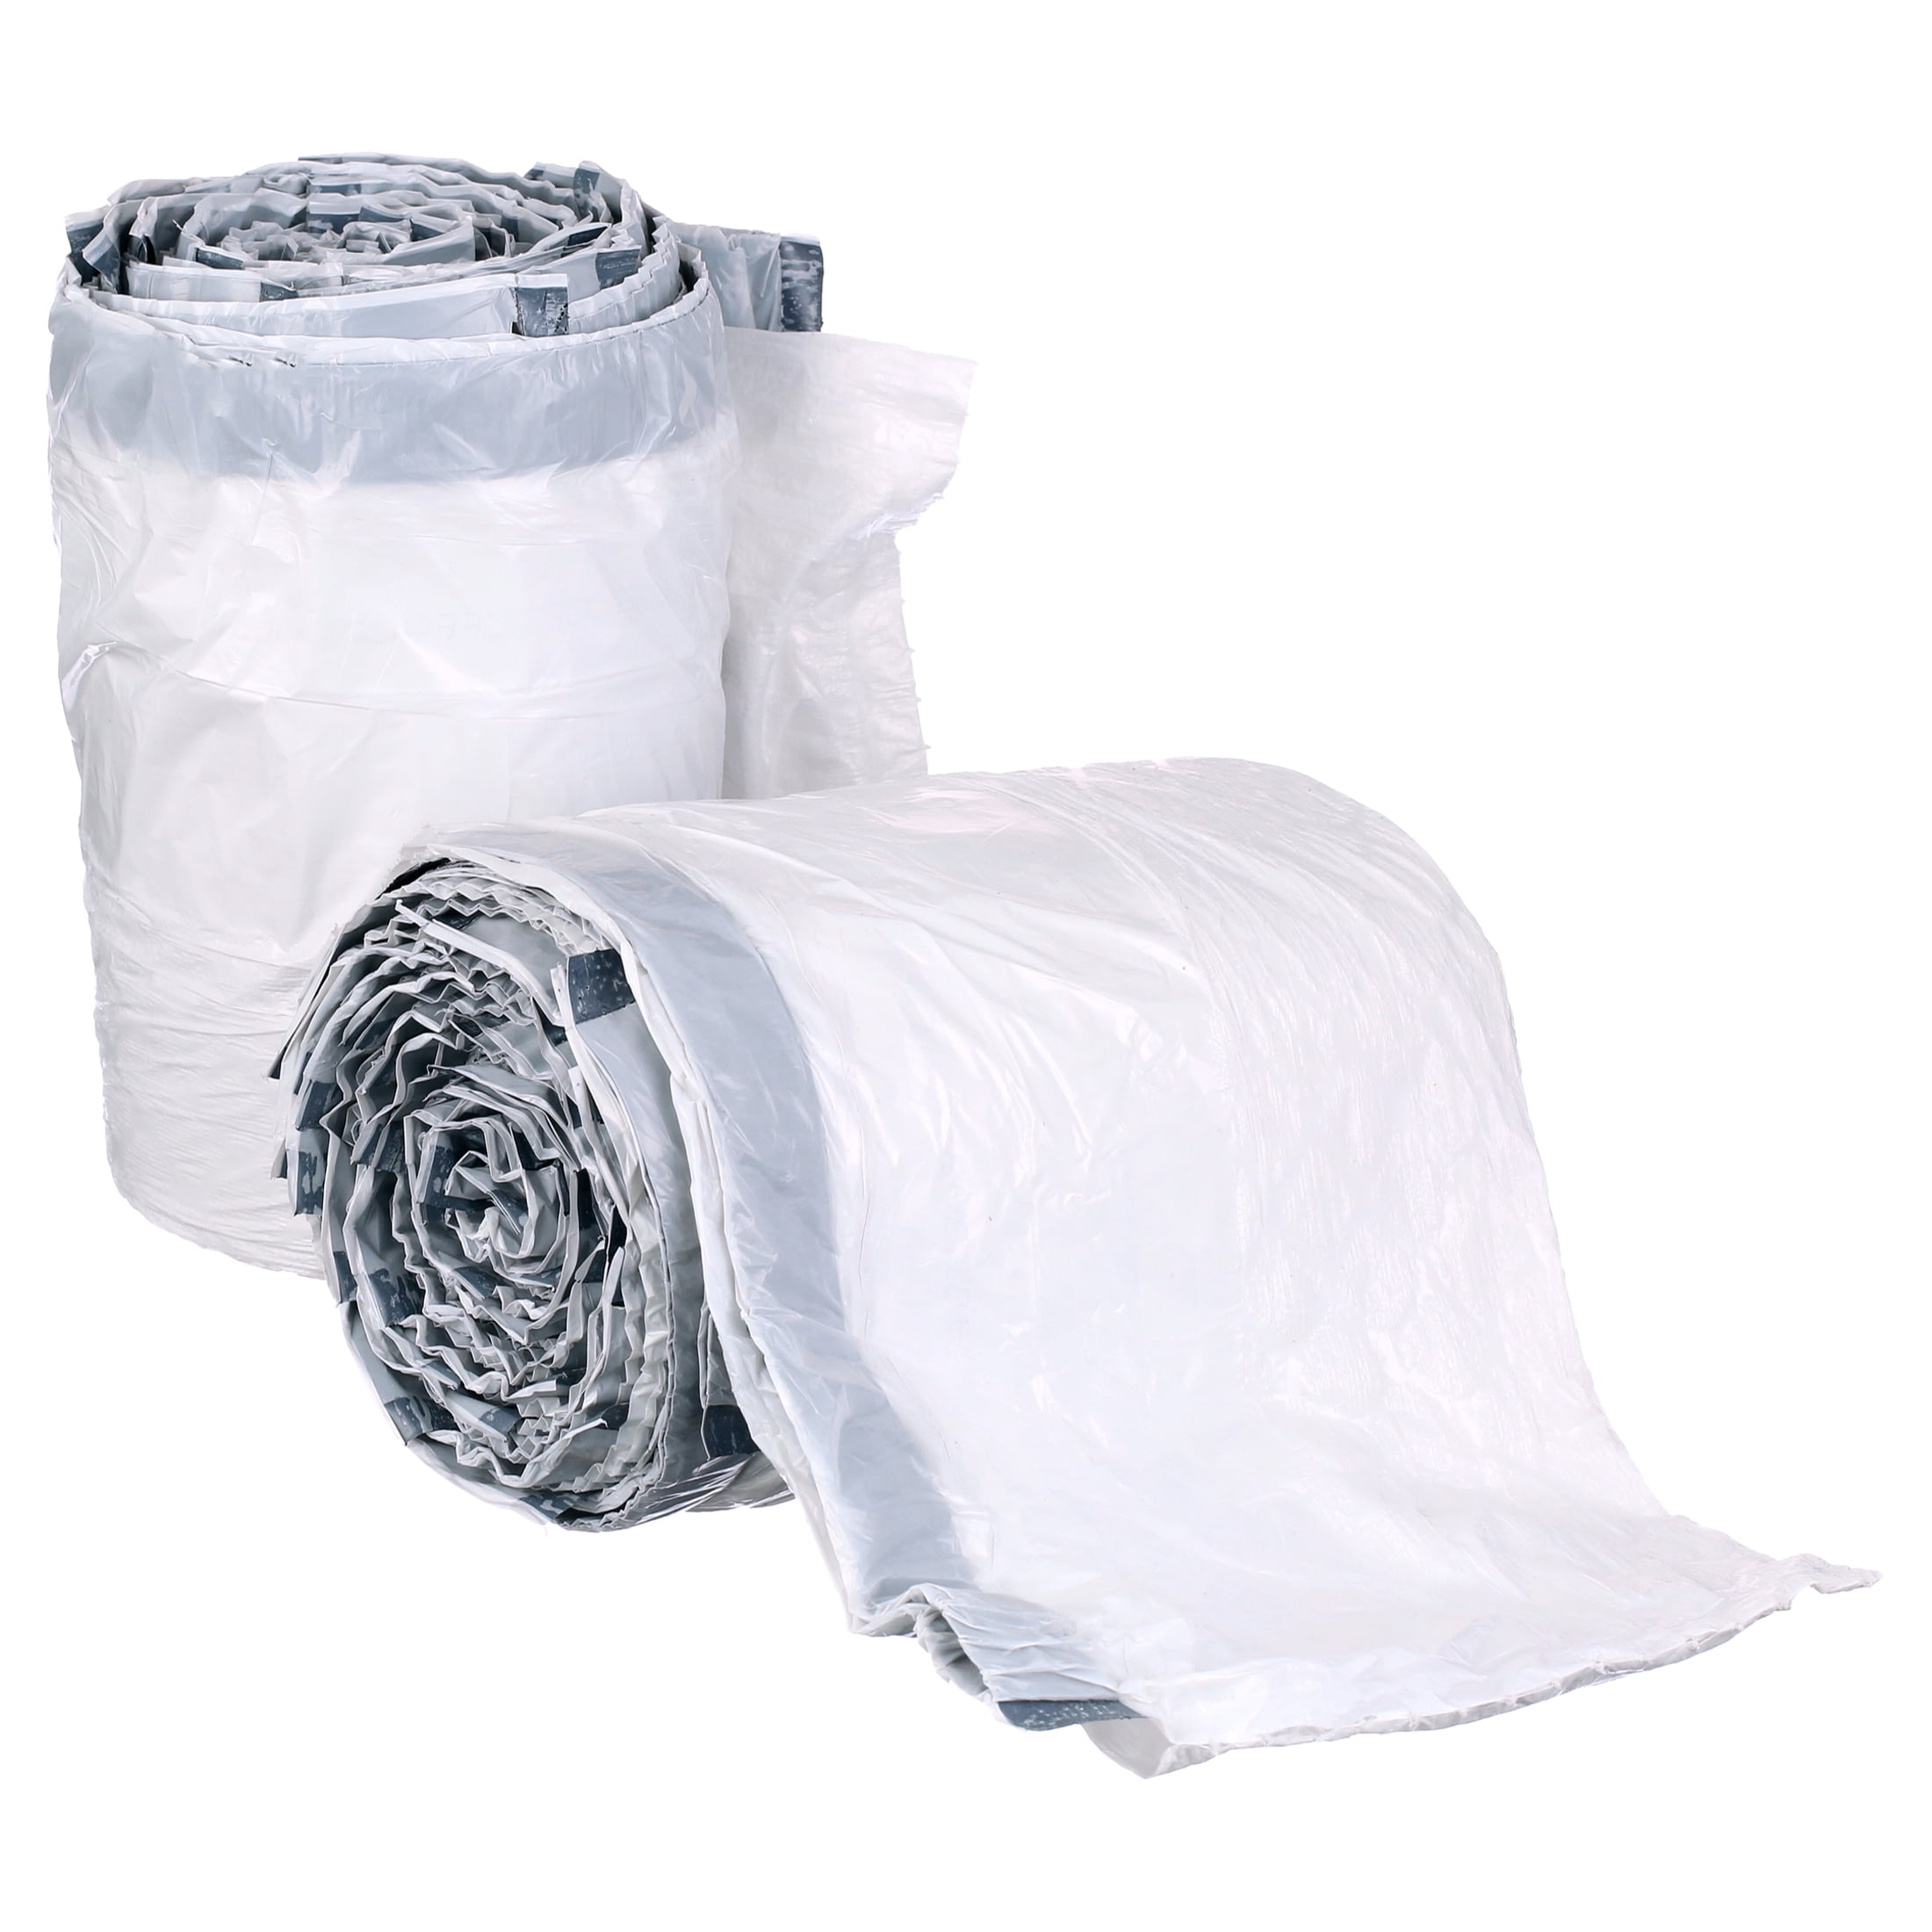 21 Gallon (about ) Large Pet Garbage Bags Leak Proof Heavy Duty